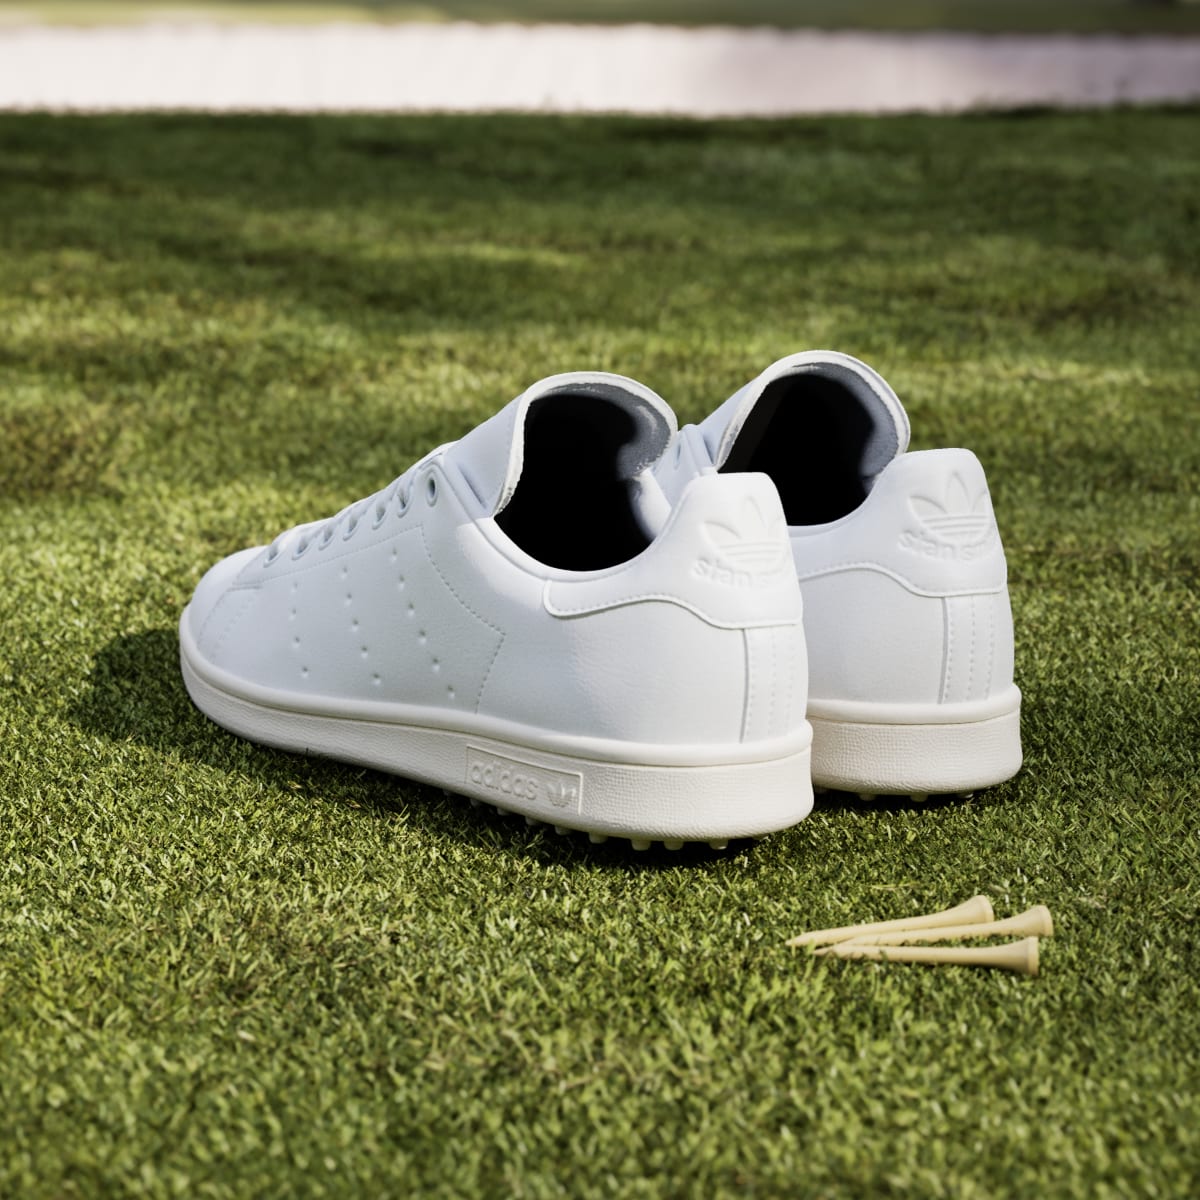 Adidas Stan Smith Golf Shoes. 5